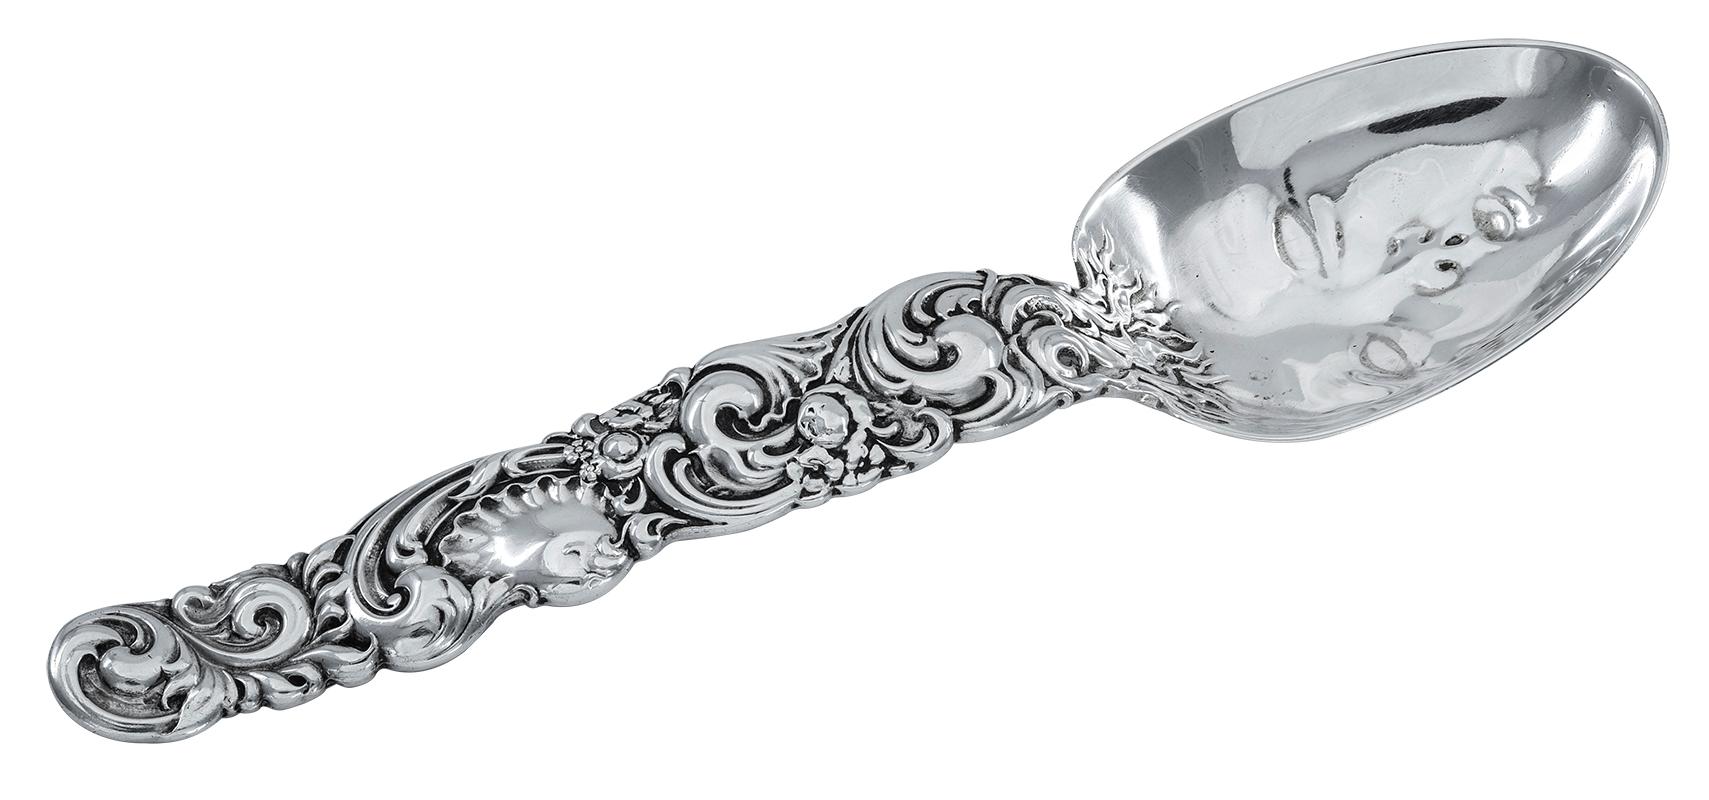 Outstanding baby spoon:  heavy gauge sterling silver with an embossed handle and a 